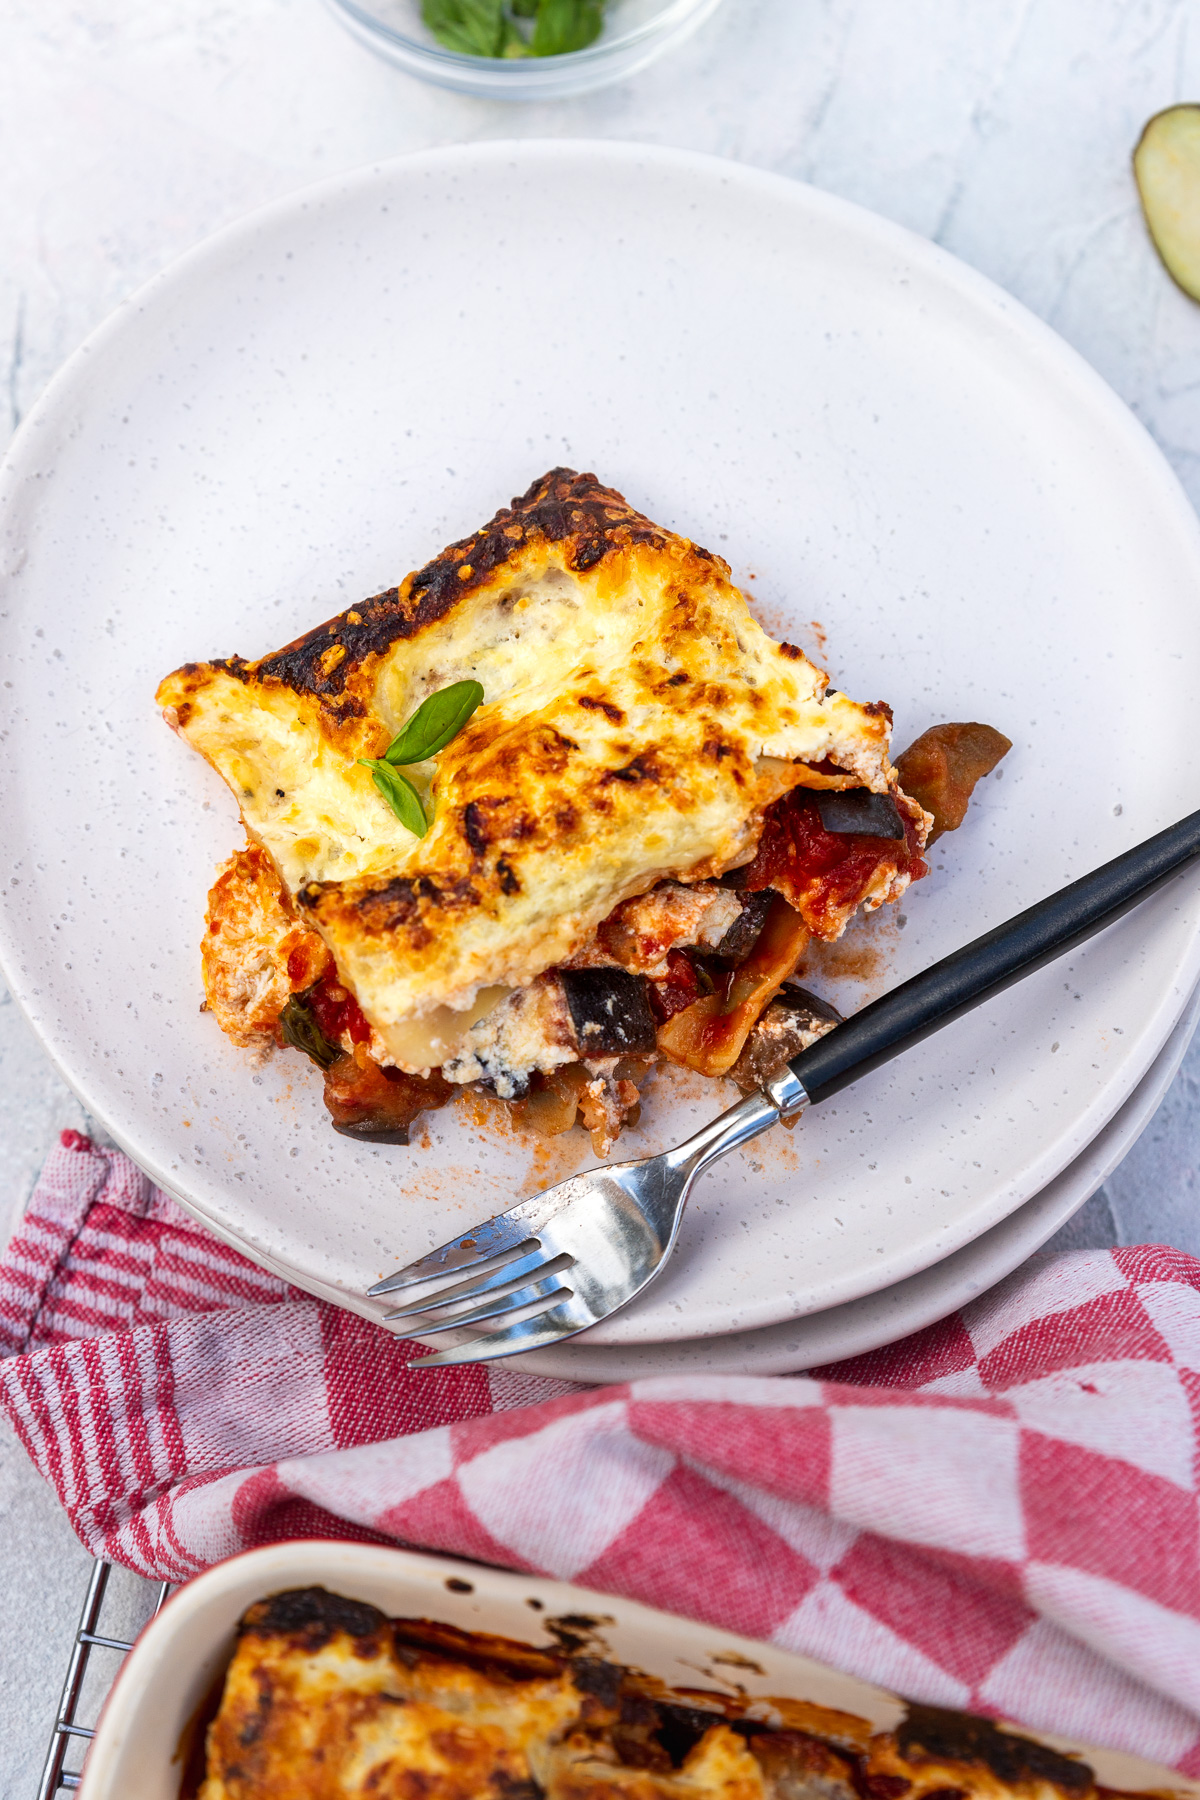 A piece of eggplant lasagna from above on a white plate with a red checked tea towel and the edge of the baking dish